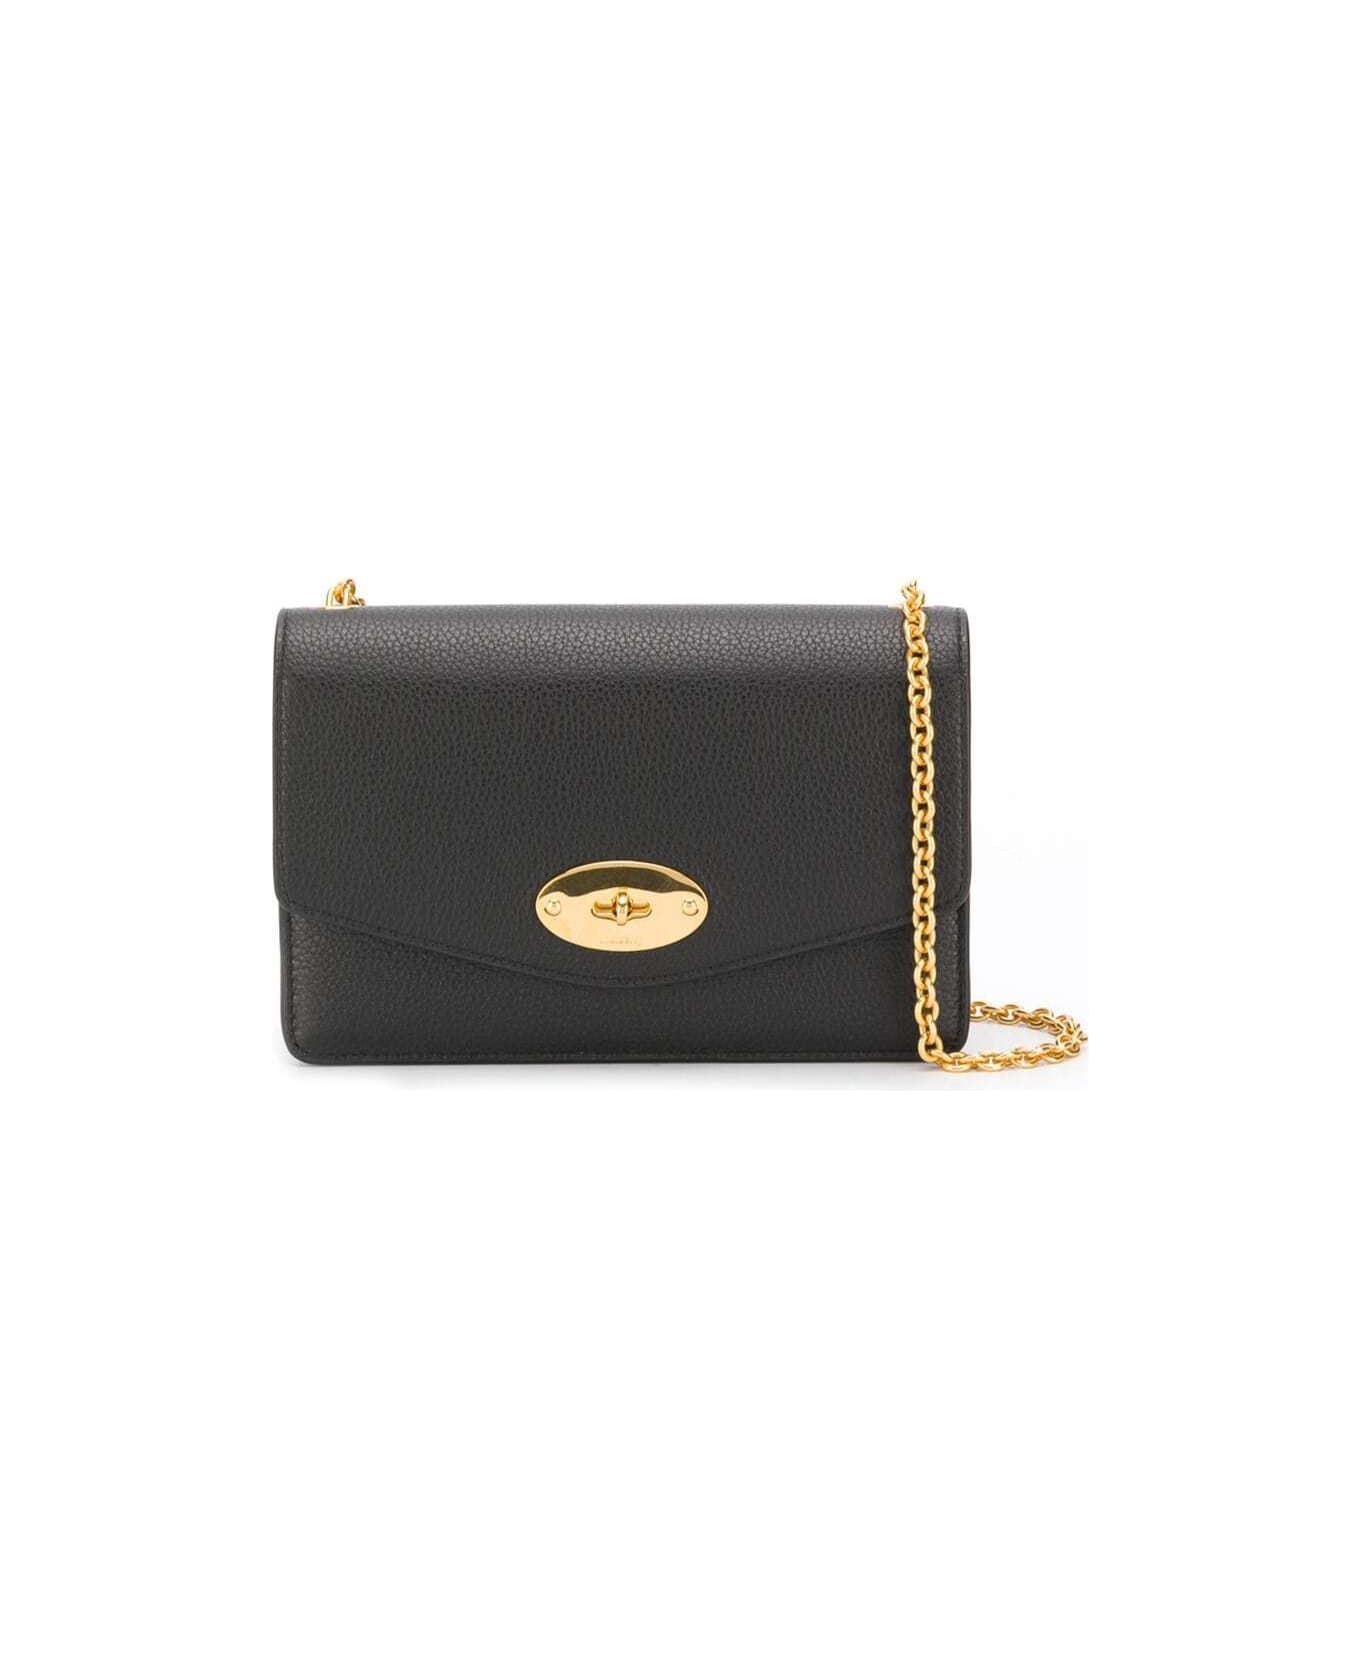 Mulberry 'small Darley' Black Shoulder Bag With Twist Closure In Grainy Leather Woman - Black